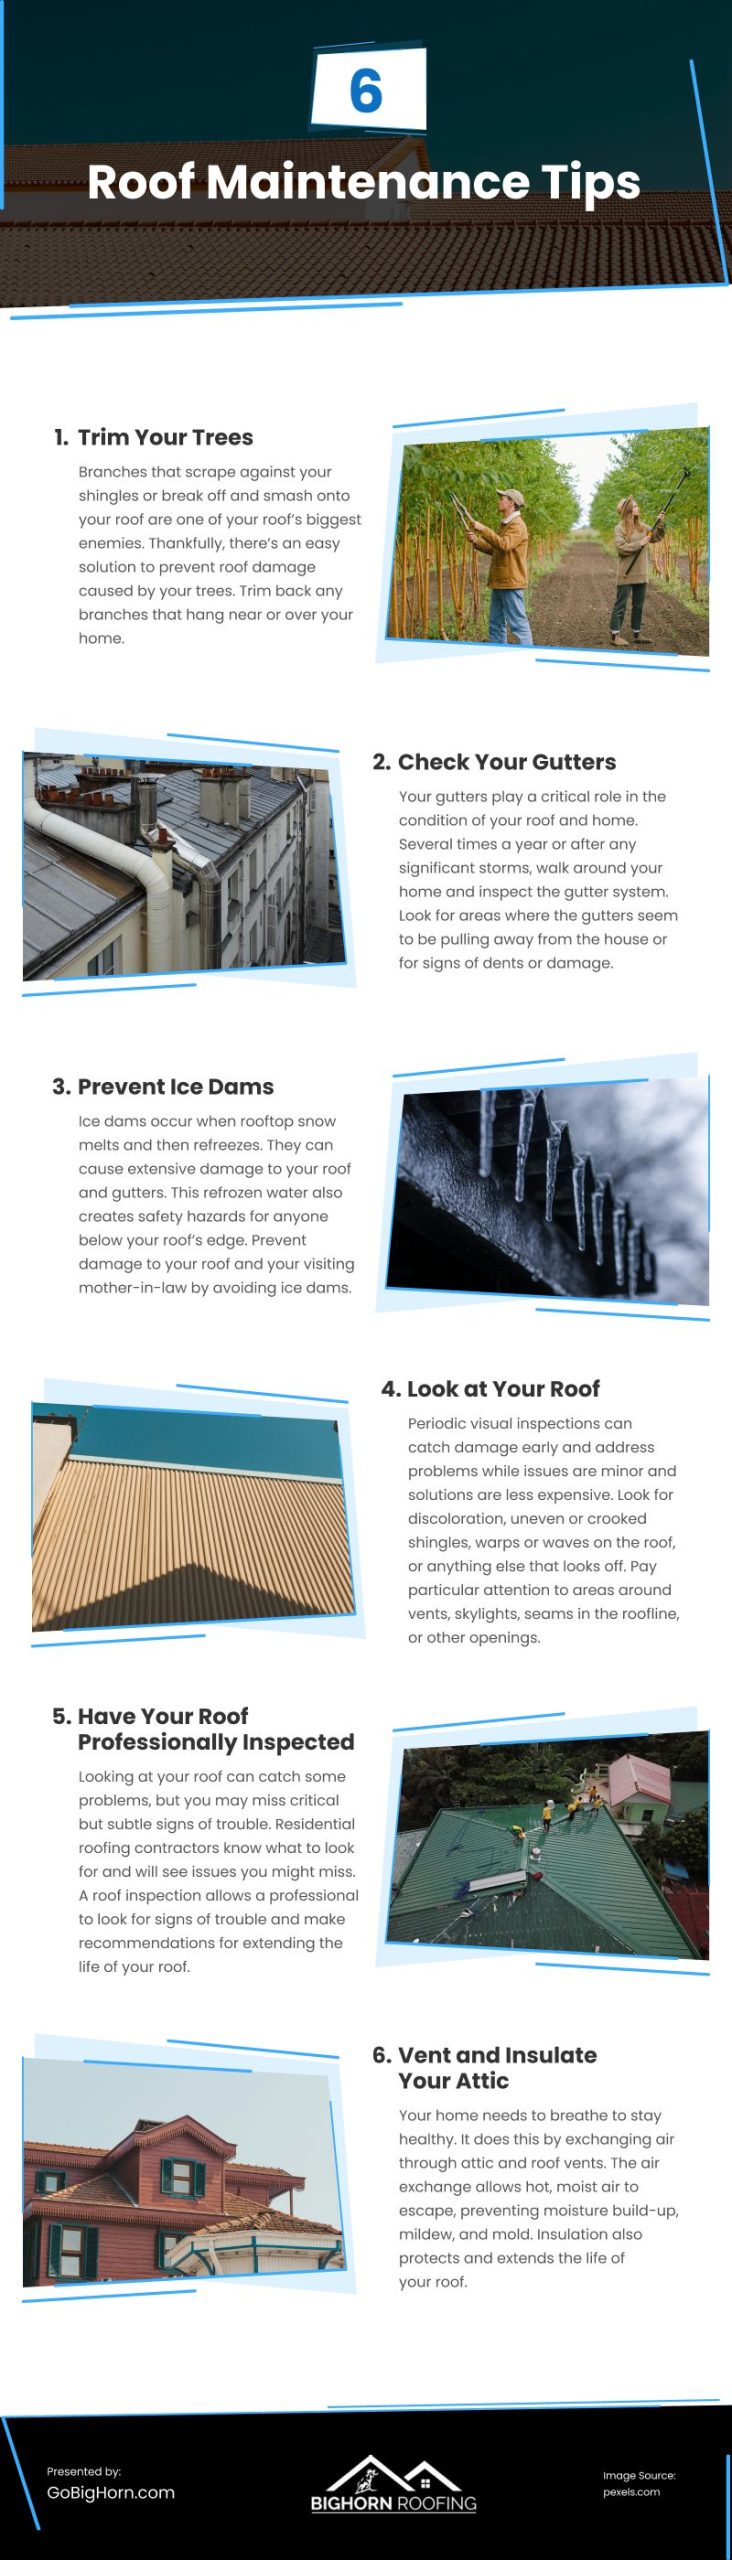 6 Roof Maintenance Tips Infographic